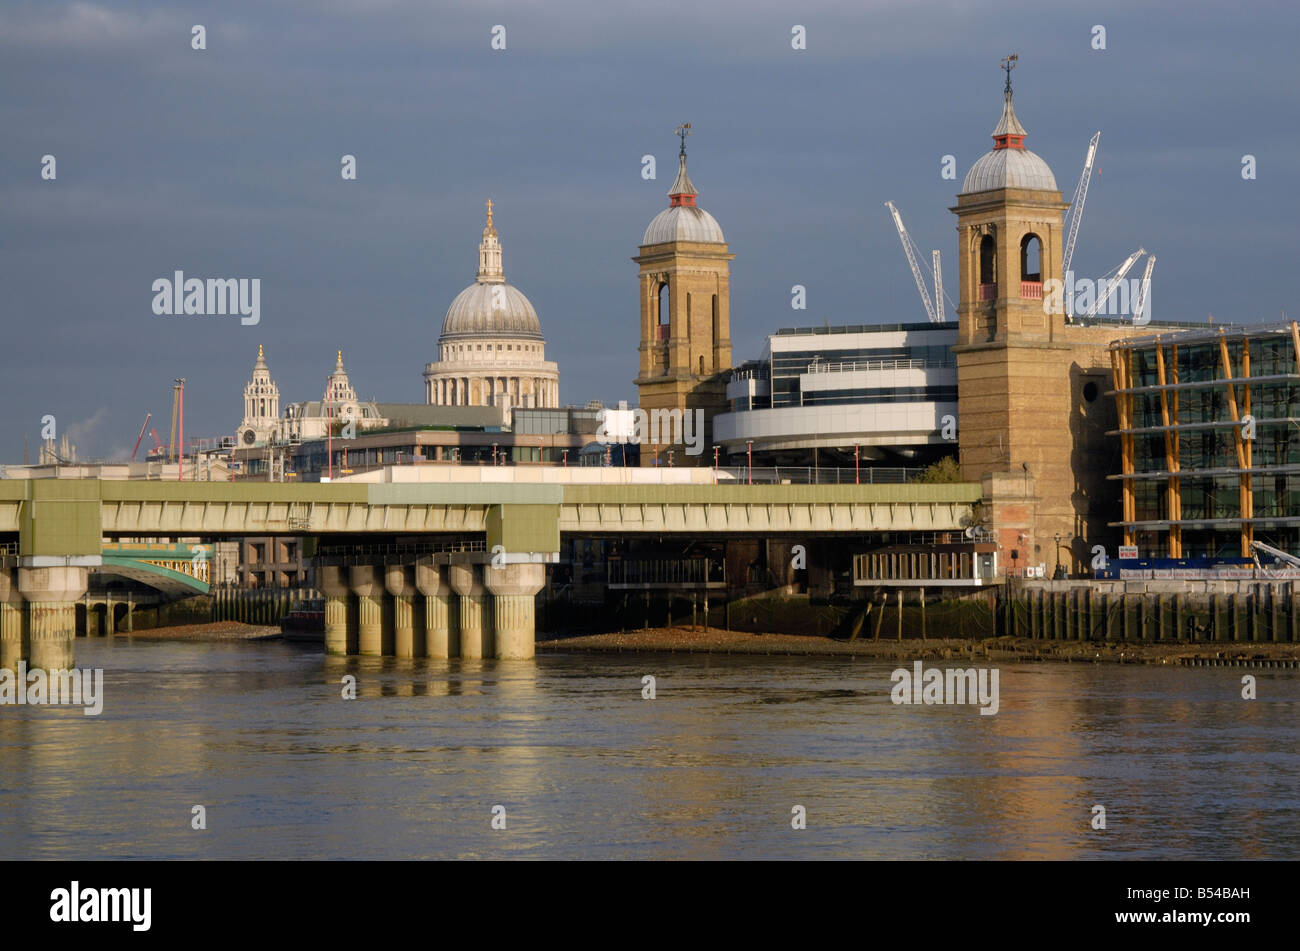 City Spires: Spires of St Paul's Cathedral and Cannon Street Station and Railway Bridge above River Thames, City of London Stock Photo